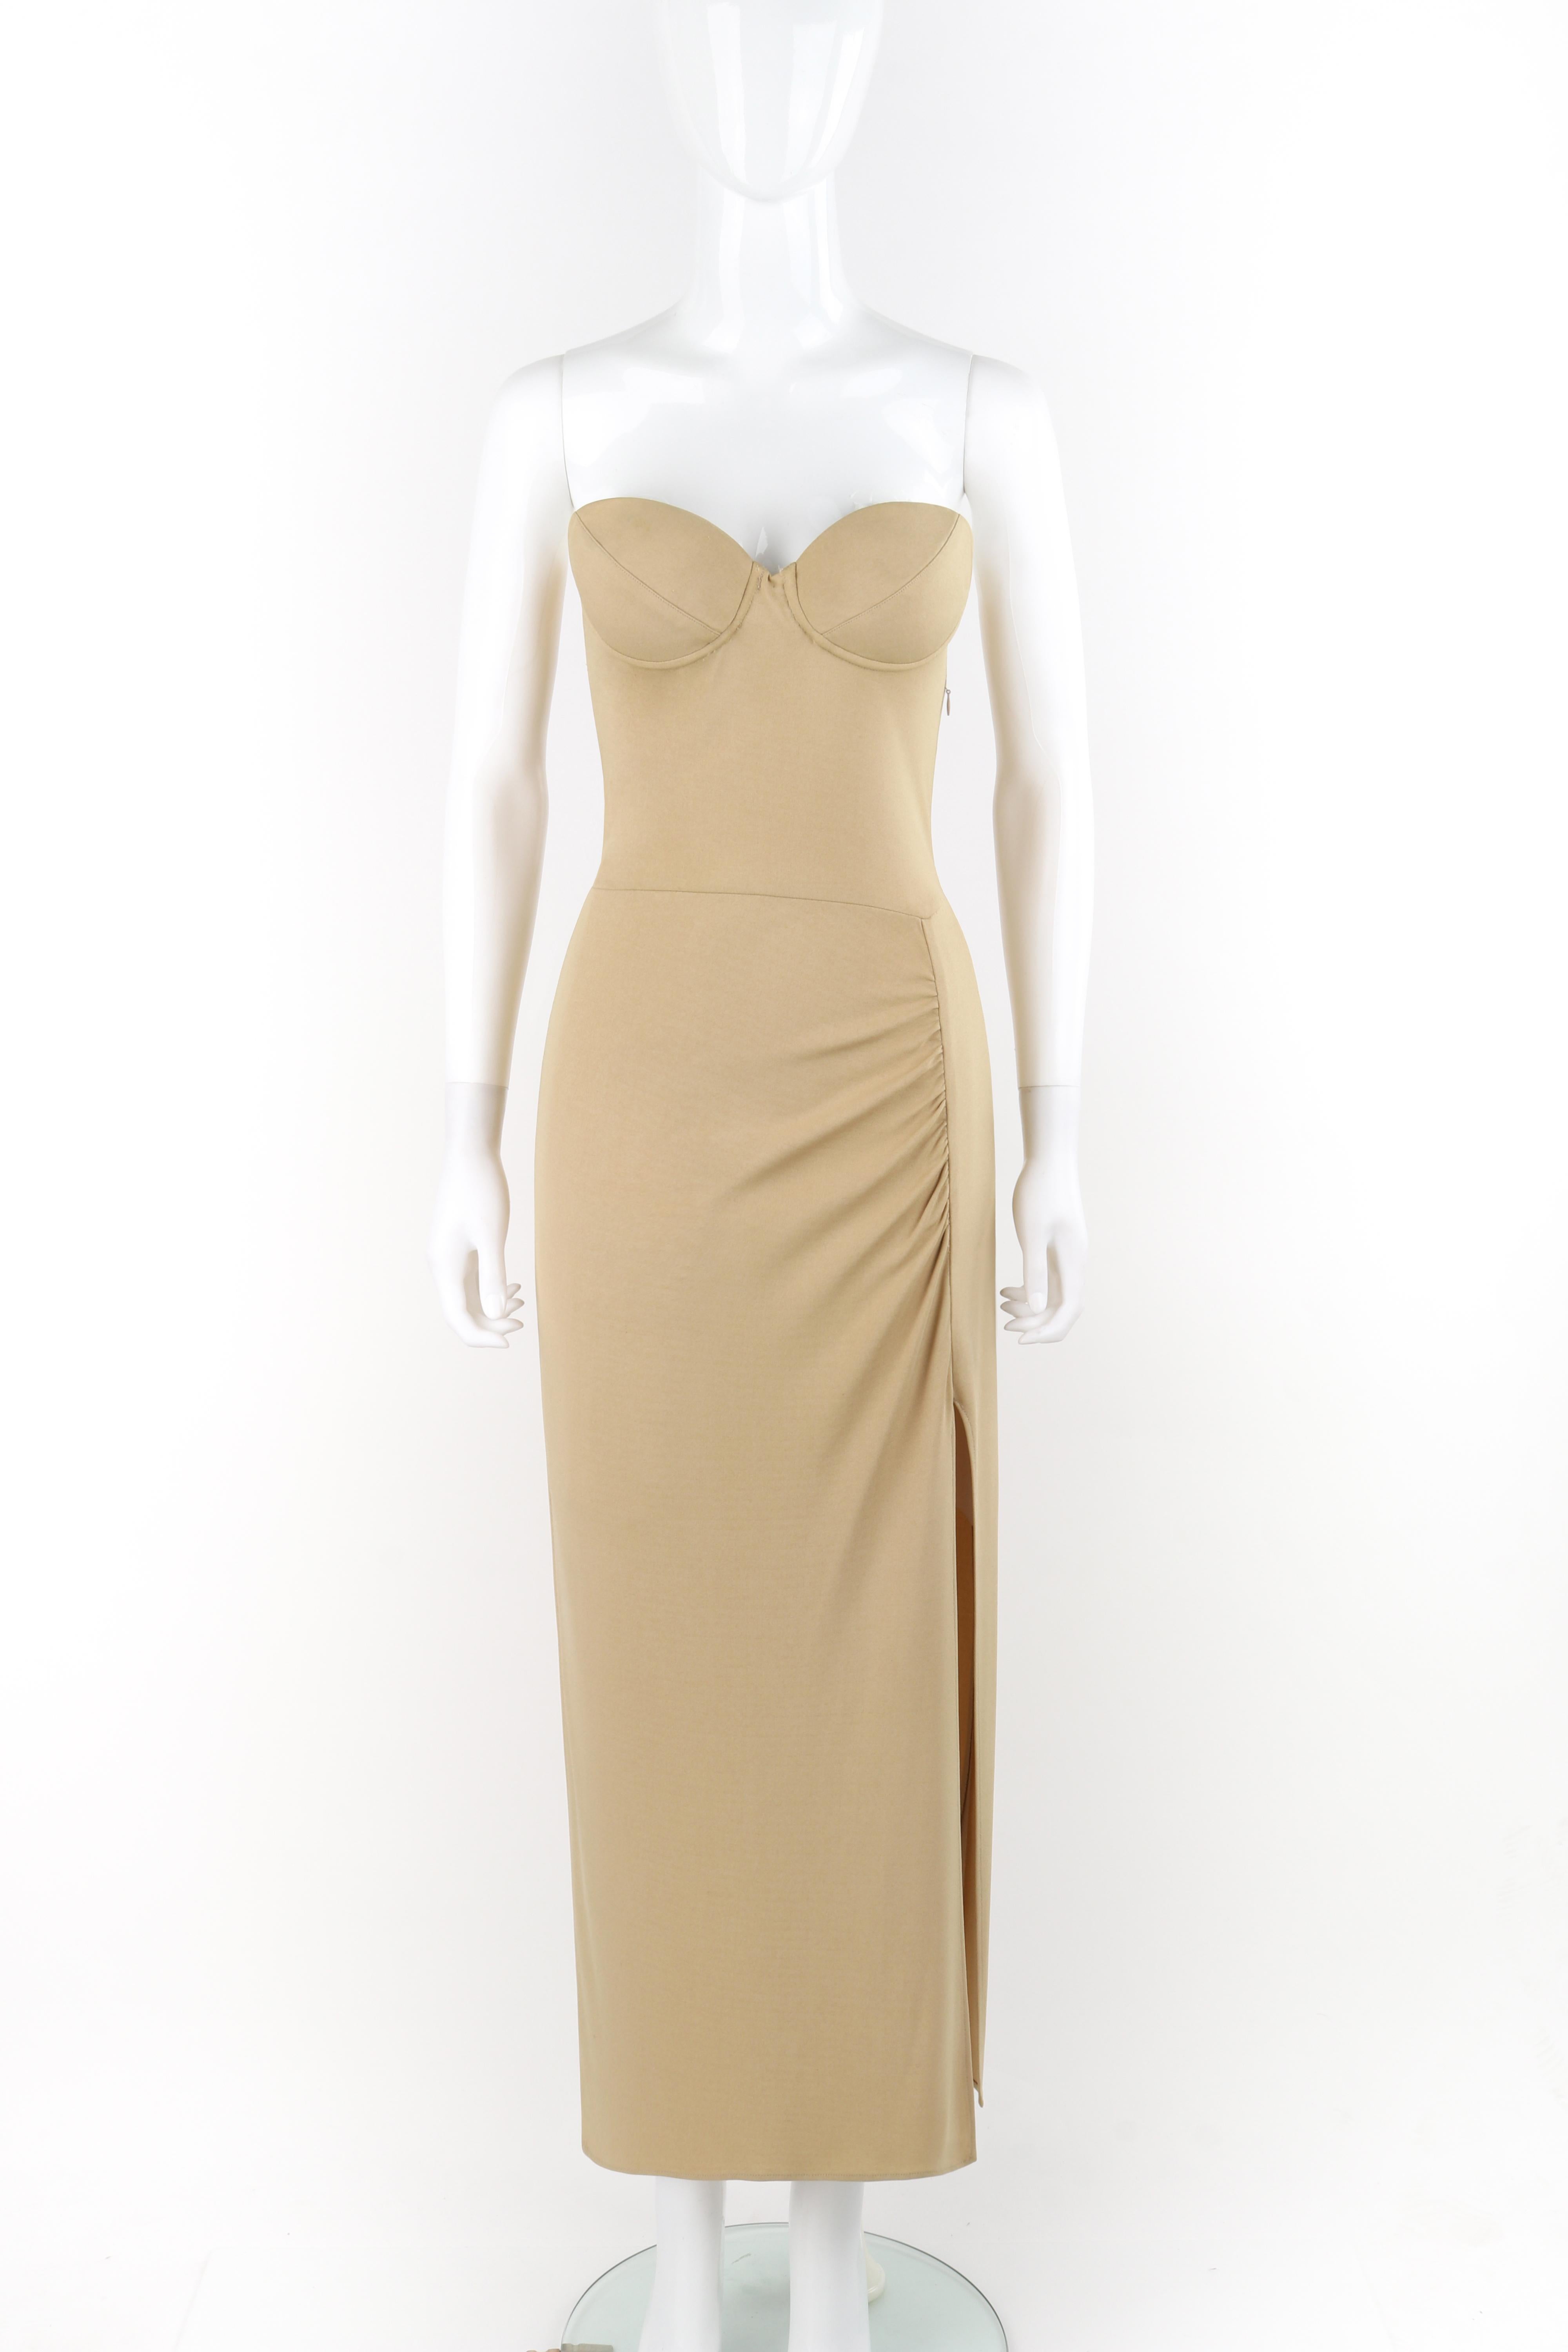 Brand / Manufacturer: Norma Kamali
Circa: 1980s
Designer: Norma Kamali
Style: Maxi Dress
Color(s): Shades of tan
Lined: No
Unmarked Fabric Content (feel of): Polyester jersey (primary fabric)
Additional Details / Inclusions: Norma Kamali circa 1980s